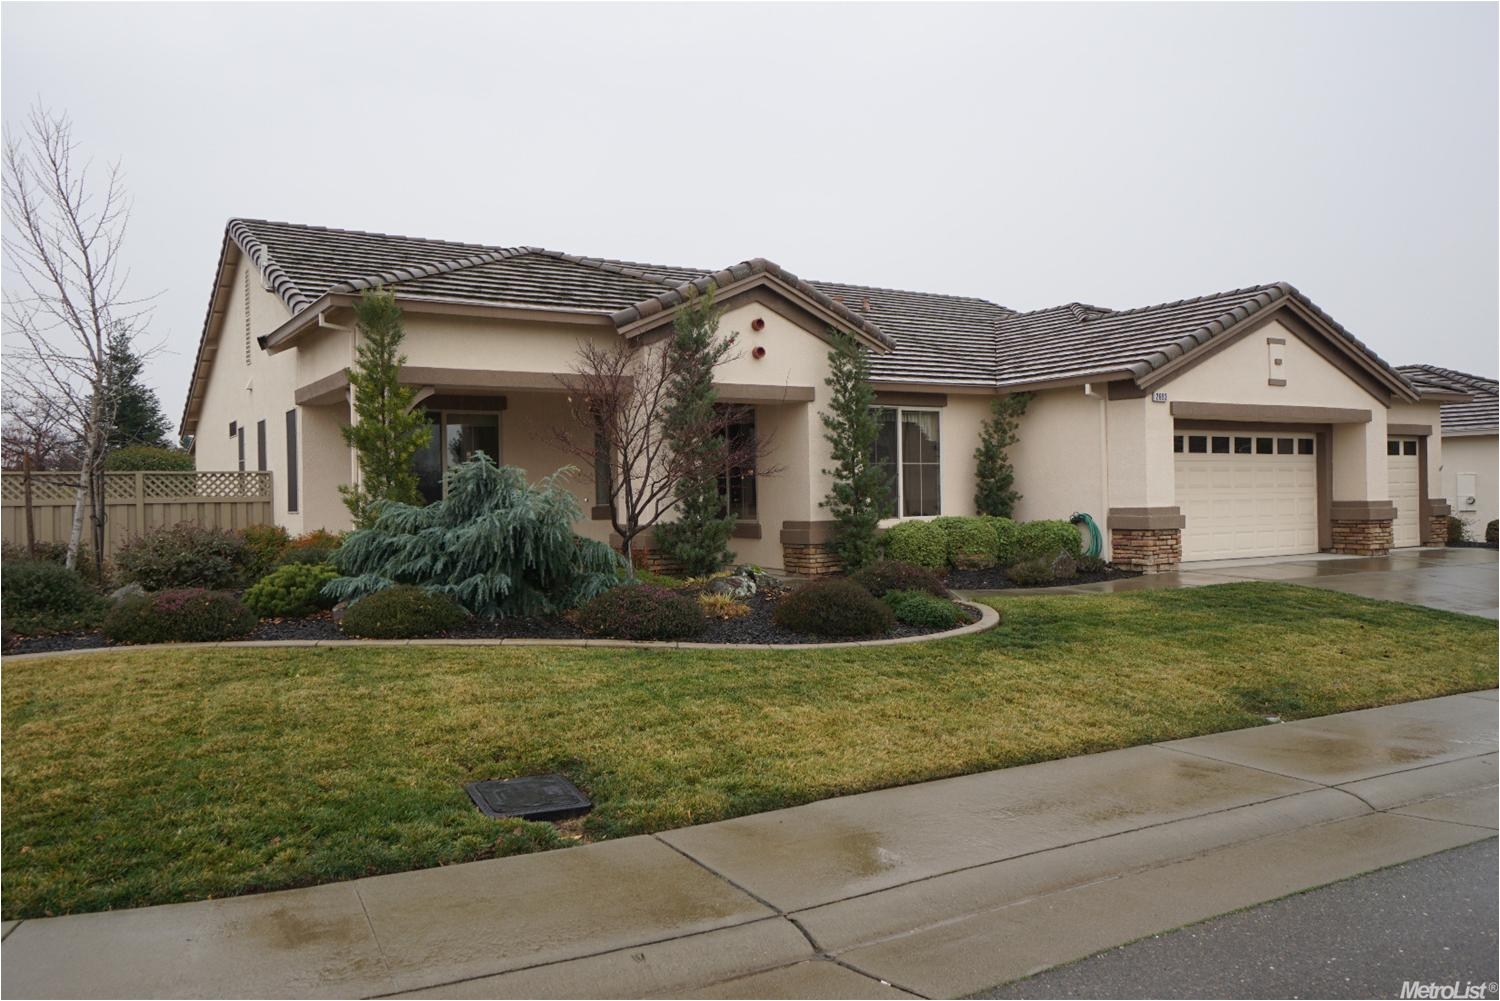 2693 winding way lincoln ca mls 16000190 specializing in active 55 plus and retirement living in placer county homes negotiated for purchase in